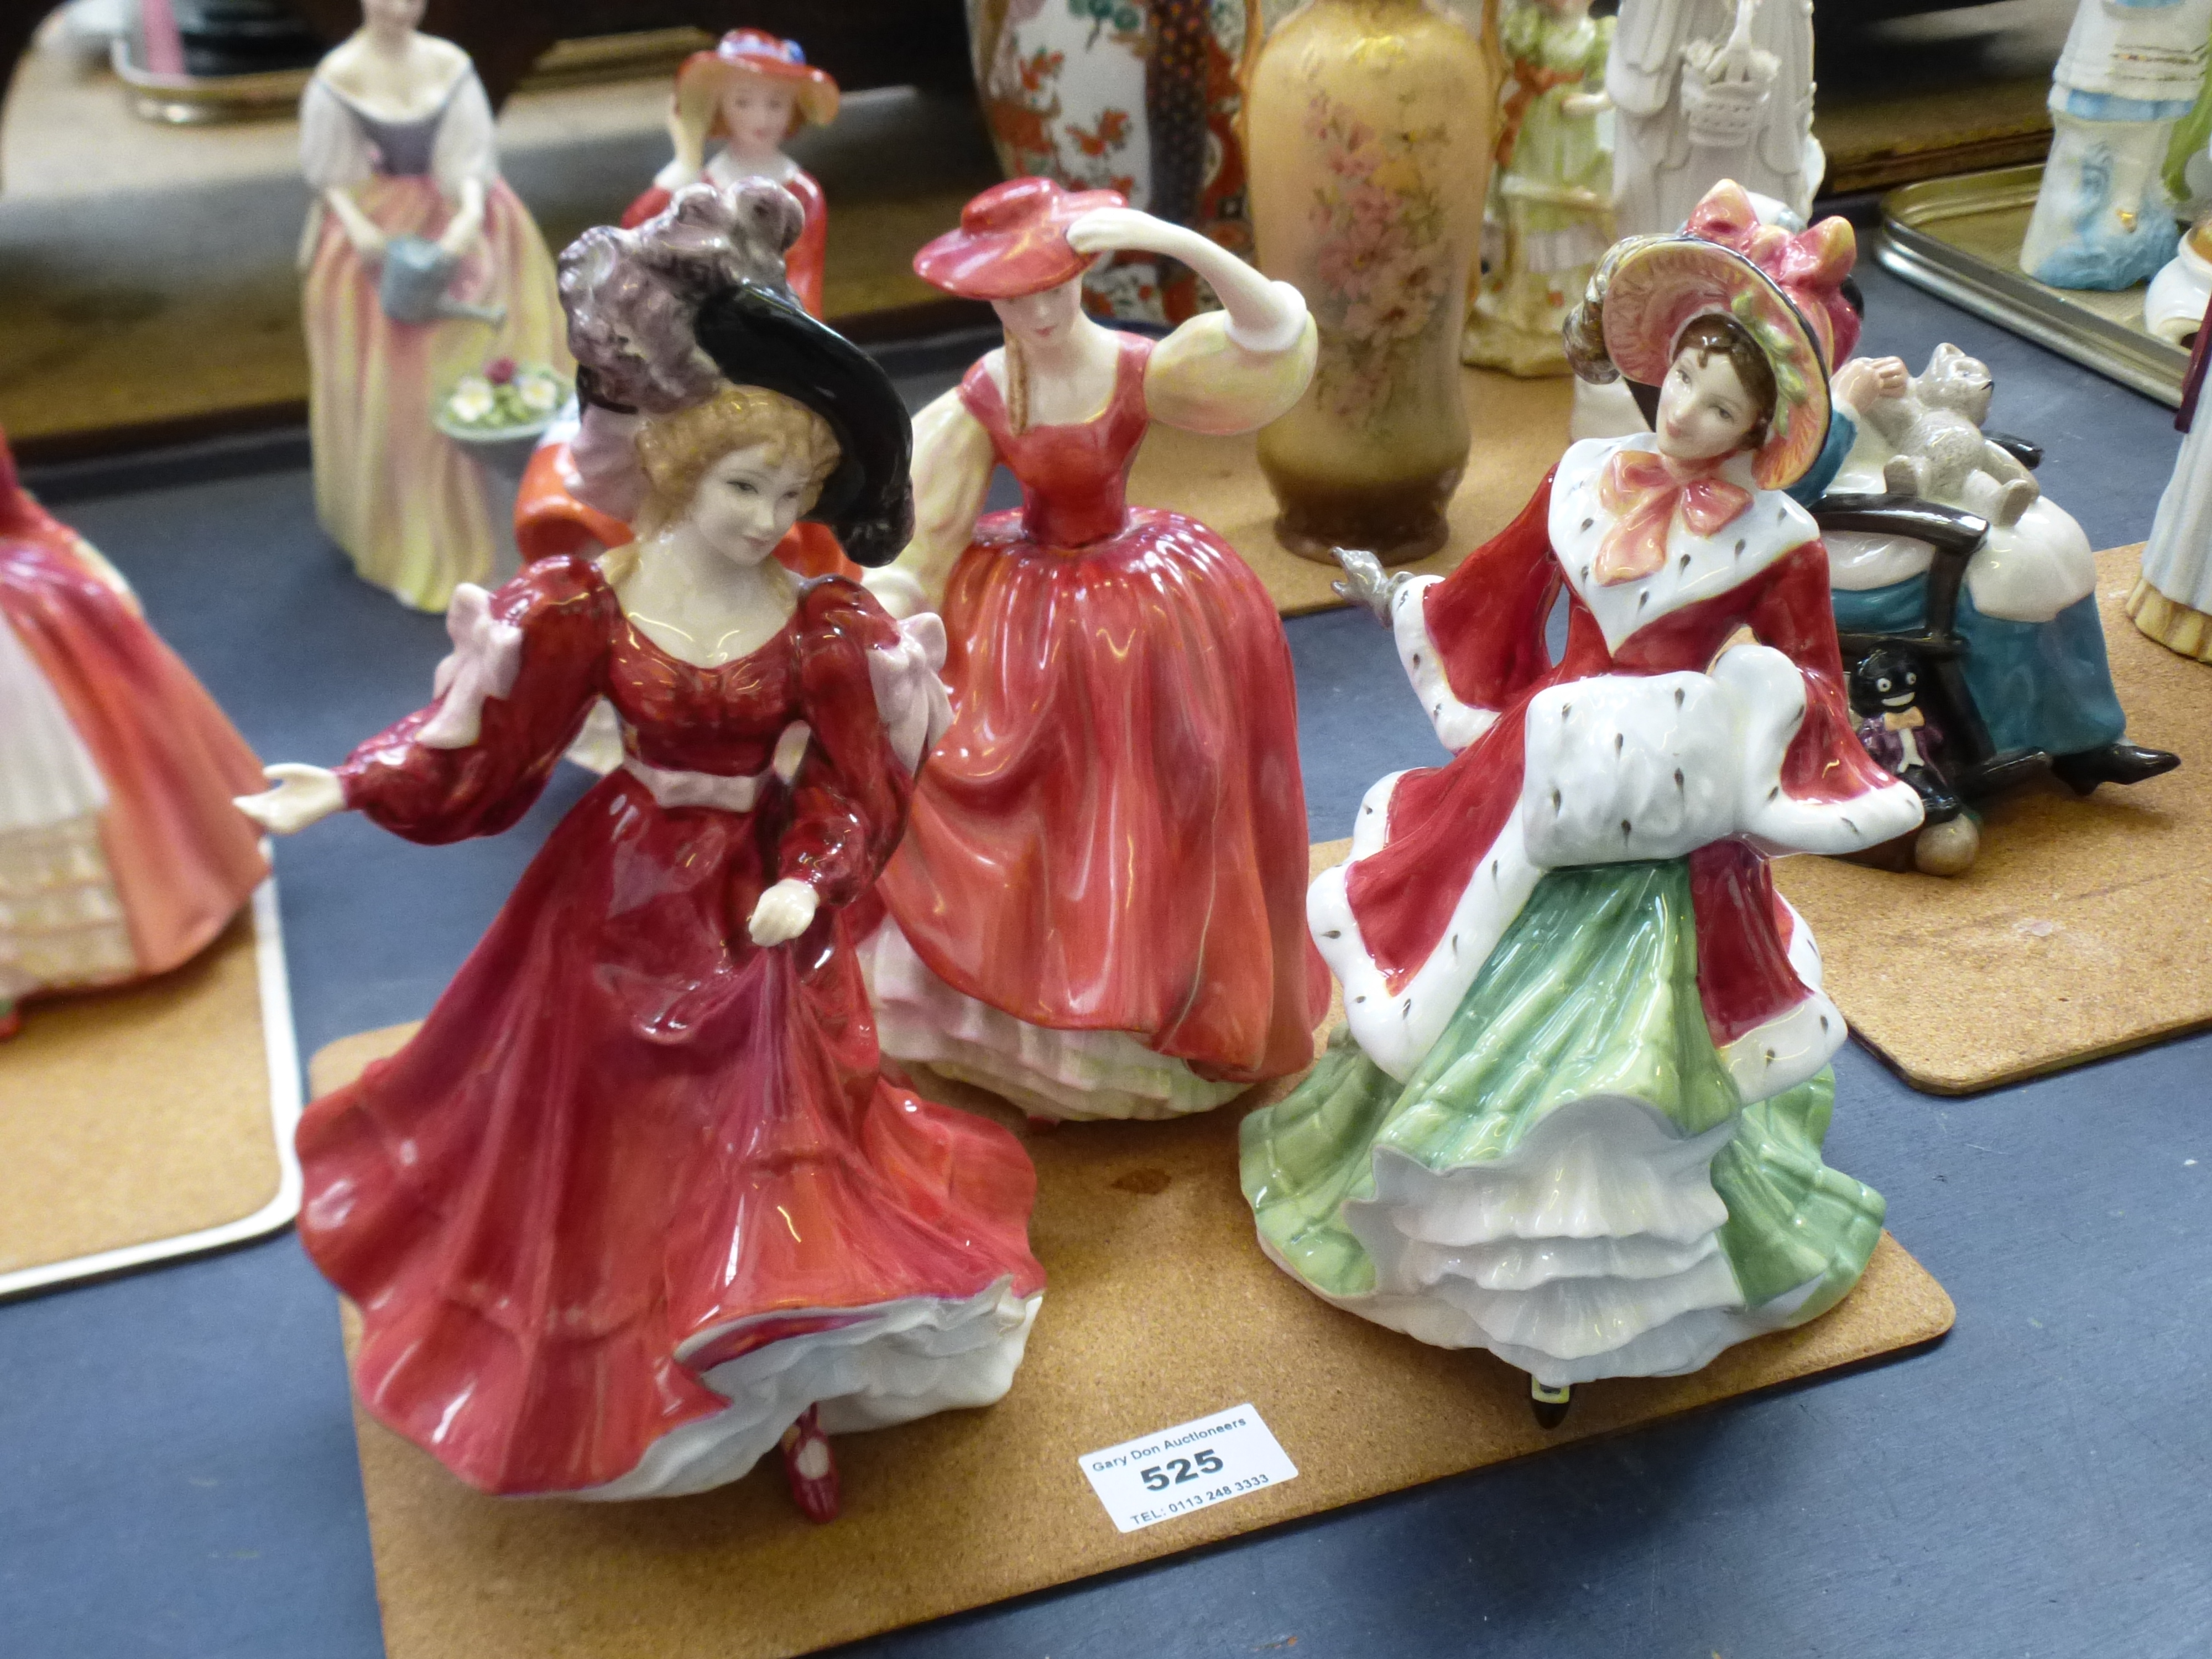 3 ROYAL DOULTON FIGURES - BUTTERCUP HN 2399, WINTERTIME HN 3622 AND FIGURE OF THE YEAR PATRICIA HN